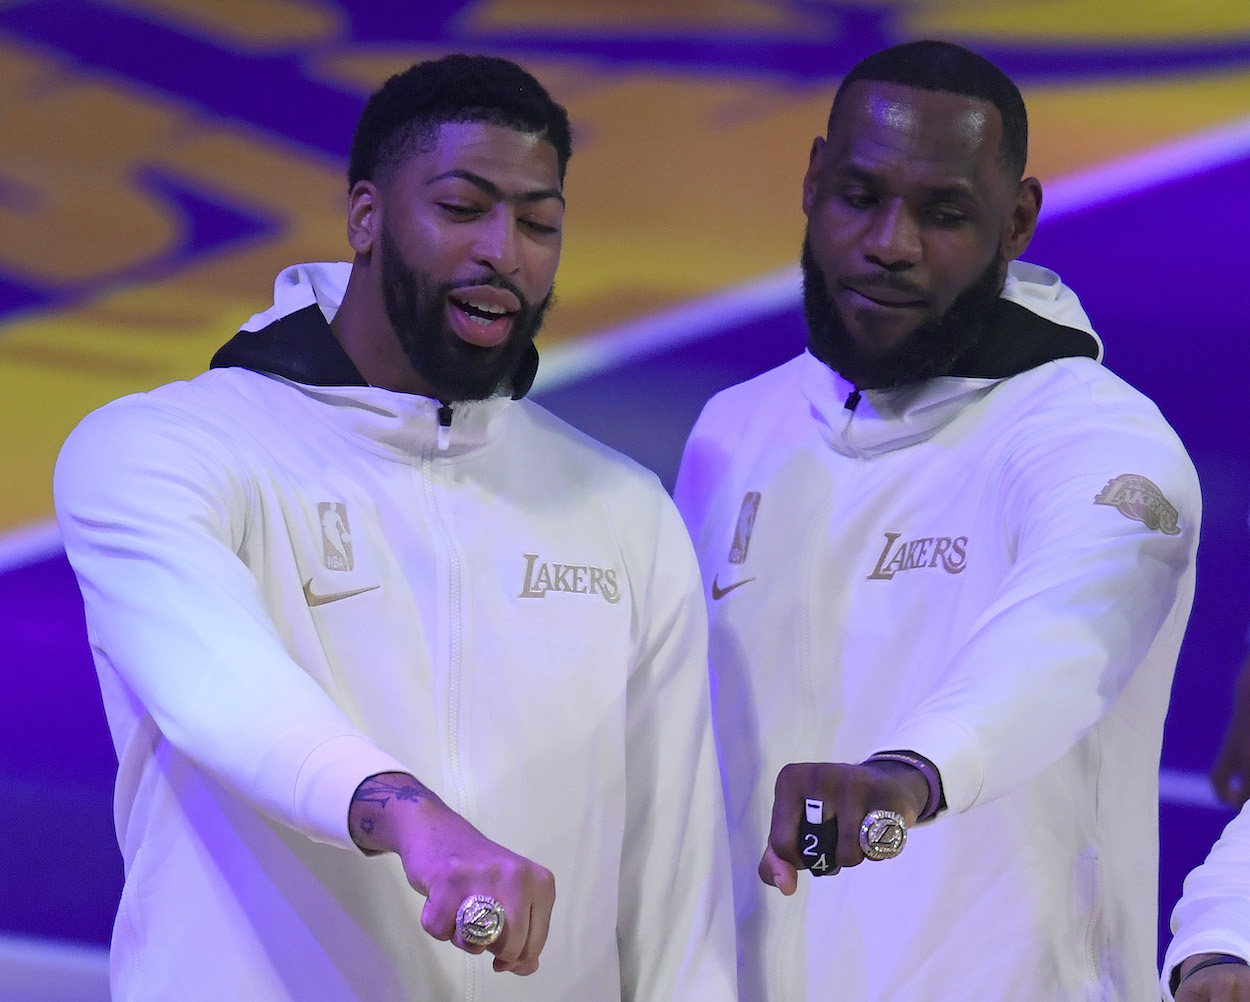 LeBron James and Anthony Davis of the Los Angeles Lakers pose with their rings during the 2020 NBA championship ring ceremony before their opening night game against the Los Angeles Clippers at Staples Center on December 22, 2020 in Los Angeles, California.